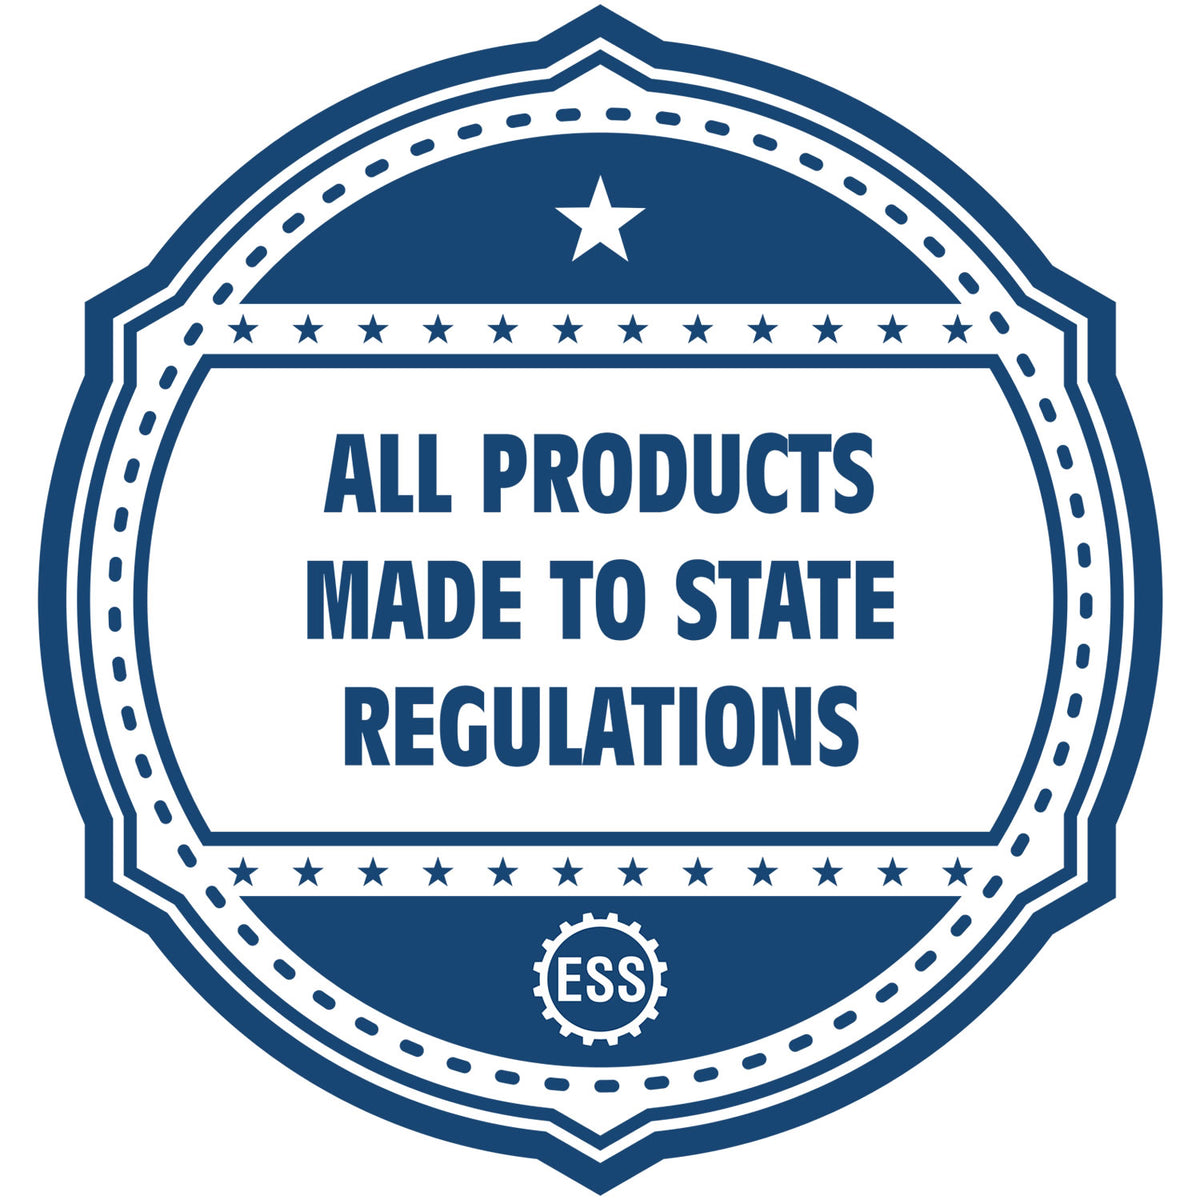 An icon or badge element for the Kentucky Landscape Architectural Seal Stamp showing that this product is made in compliance with state regulations.